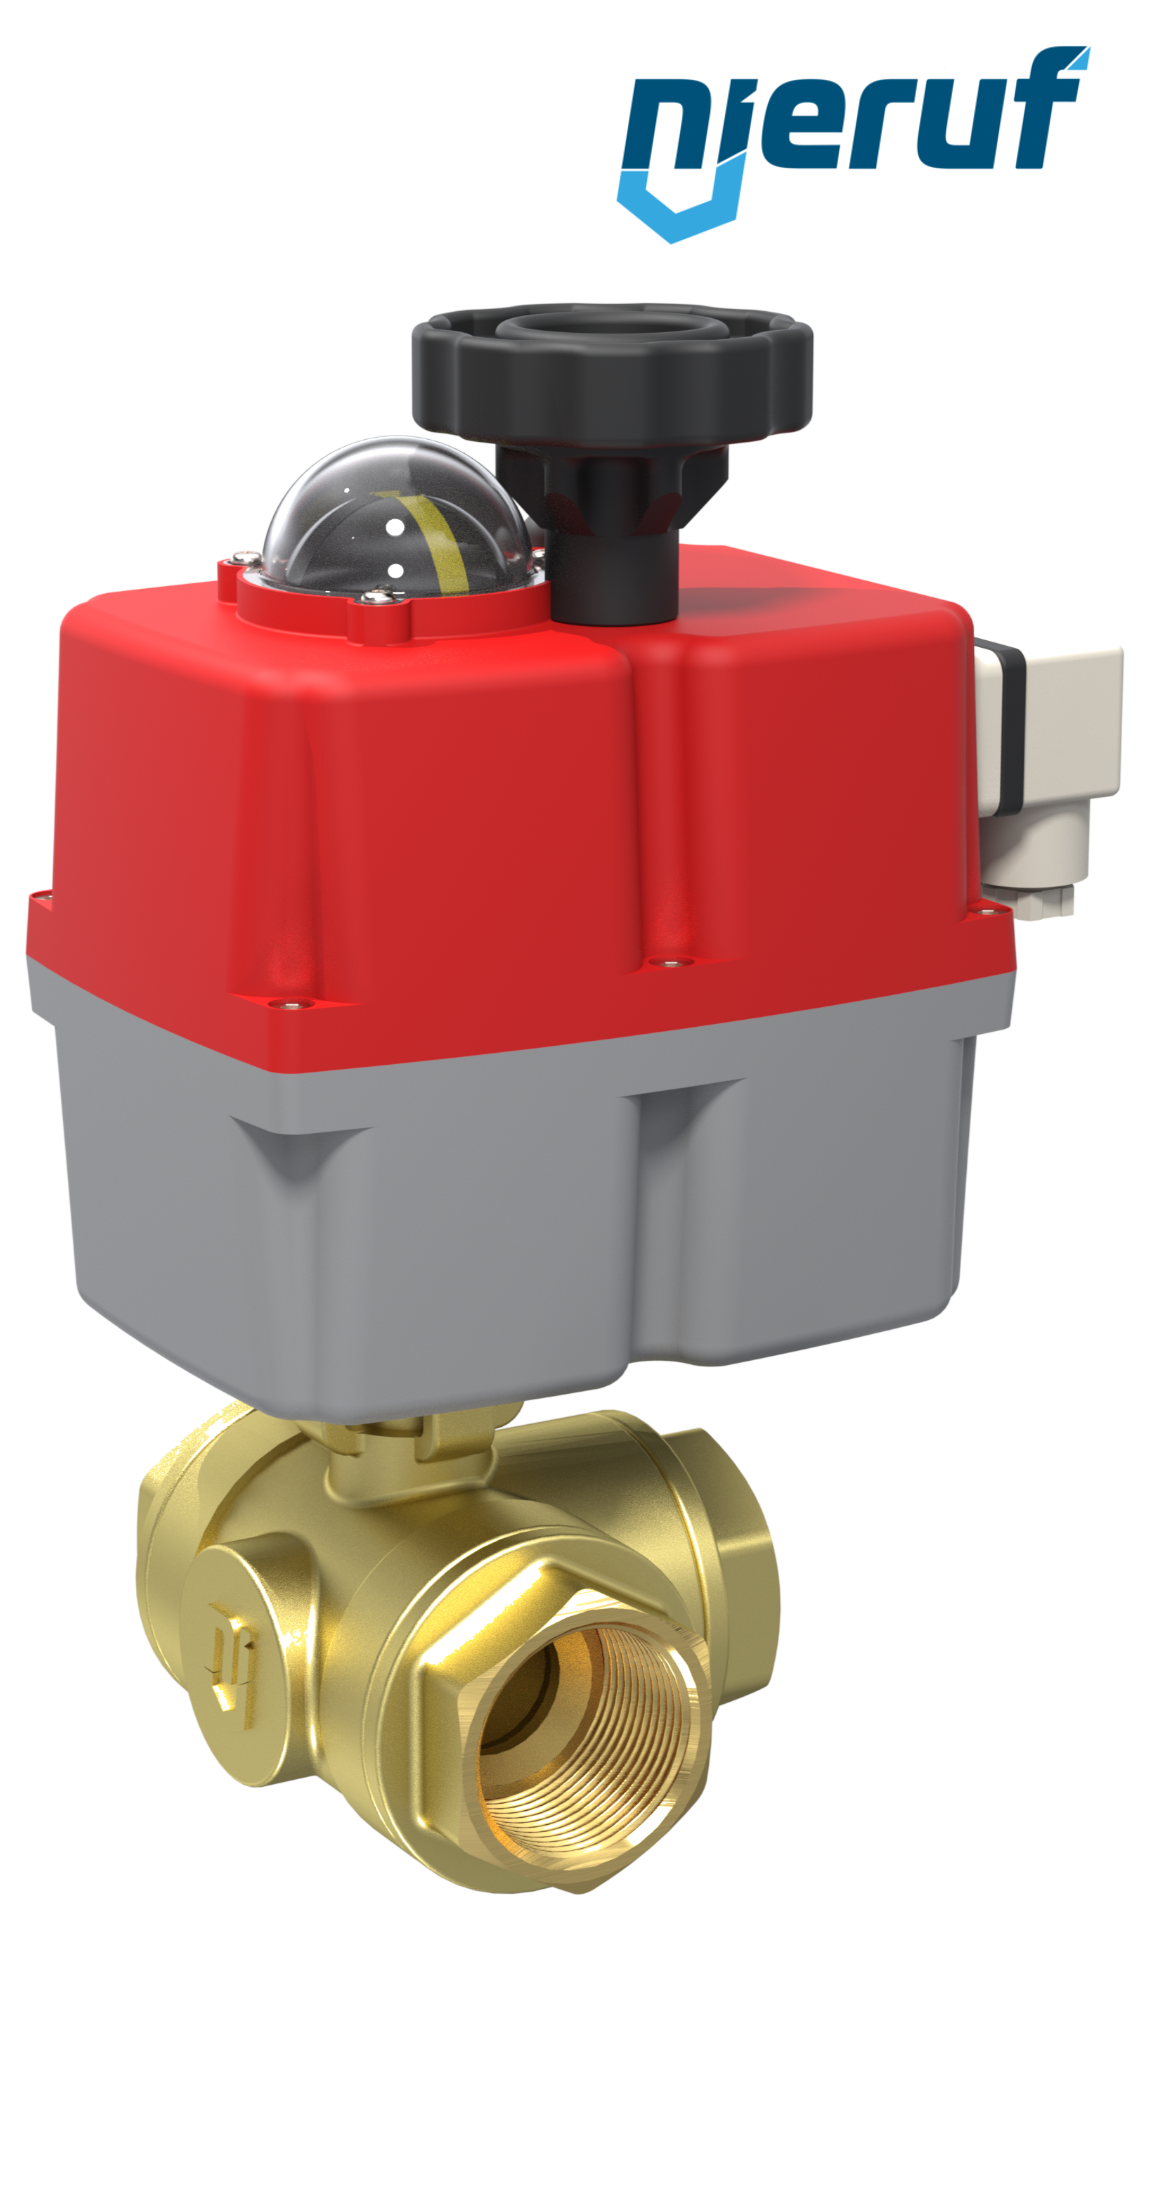 3 way automatic-ball valve 24-240V DN25 - 1" inch brass full port design with L drilling